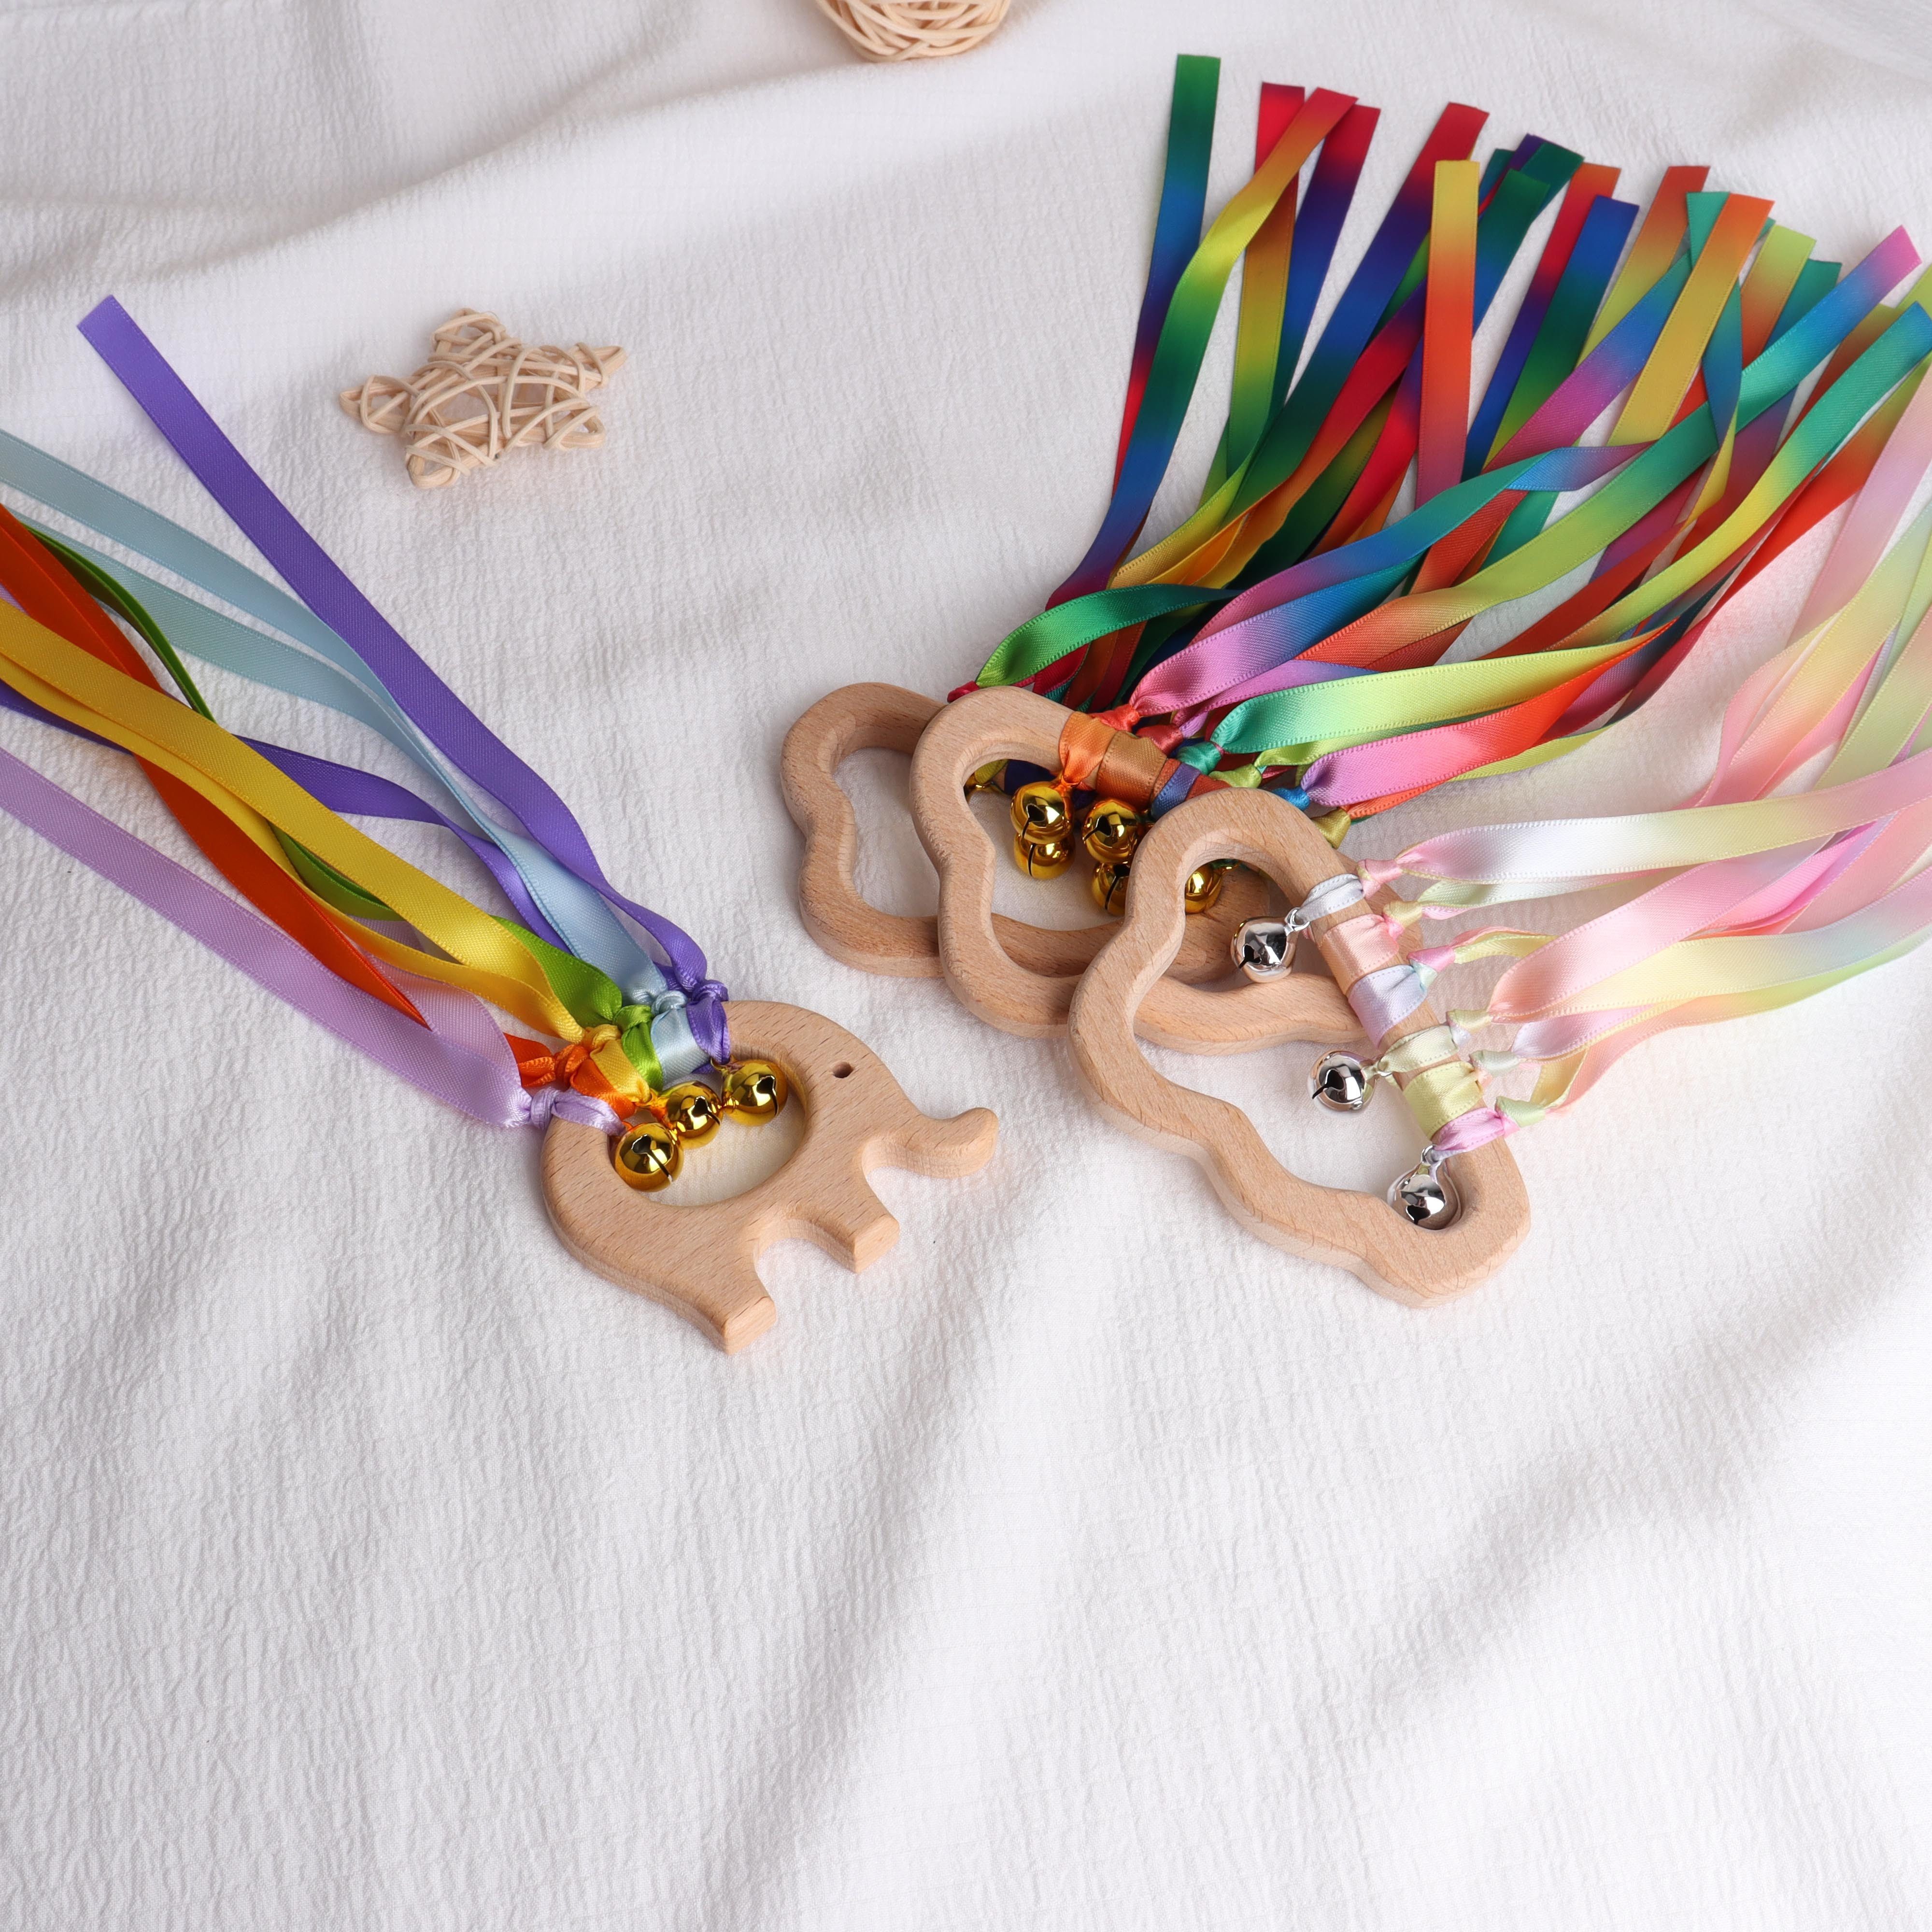 12 Pcs Rainbow Ribbon Wooden Waldorf Toys Creative Waldorf Hand Kite Set  Streamers with Wood Ring Sensory Learning Educational Toy for Playroom